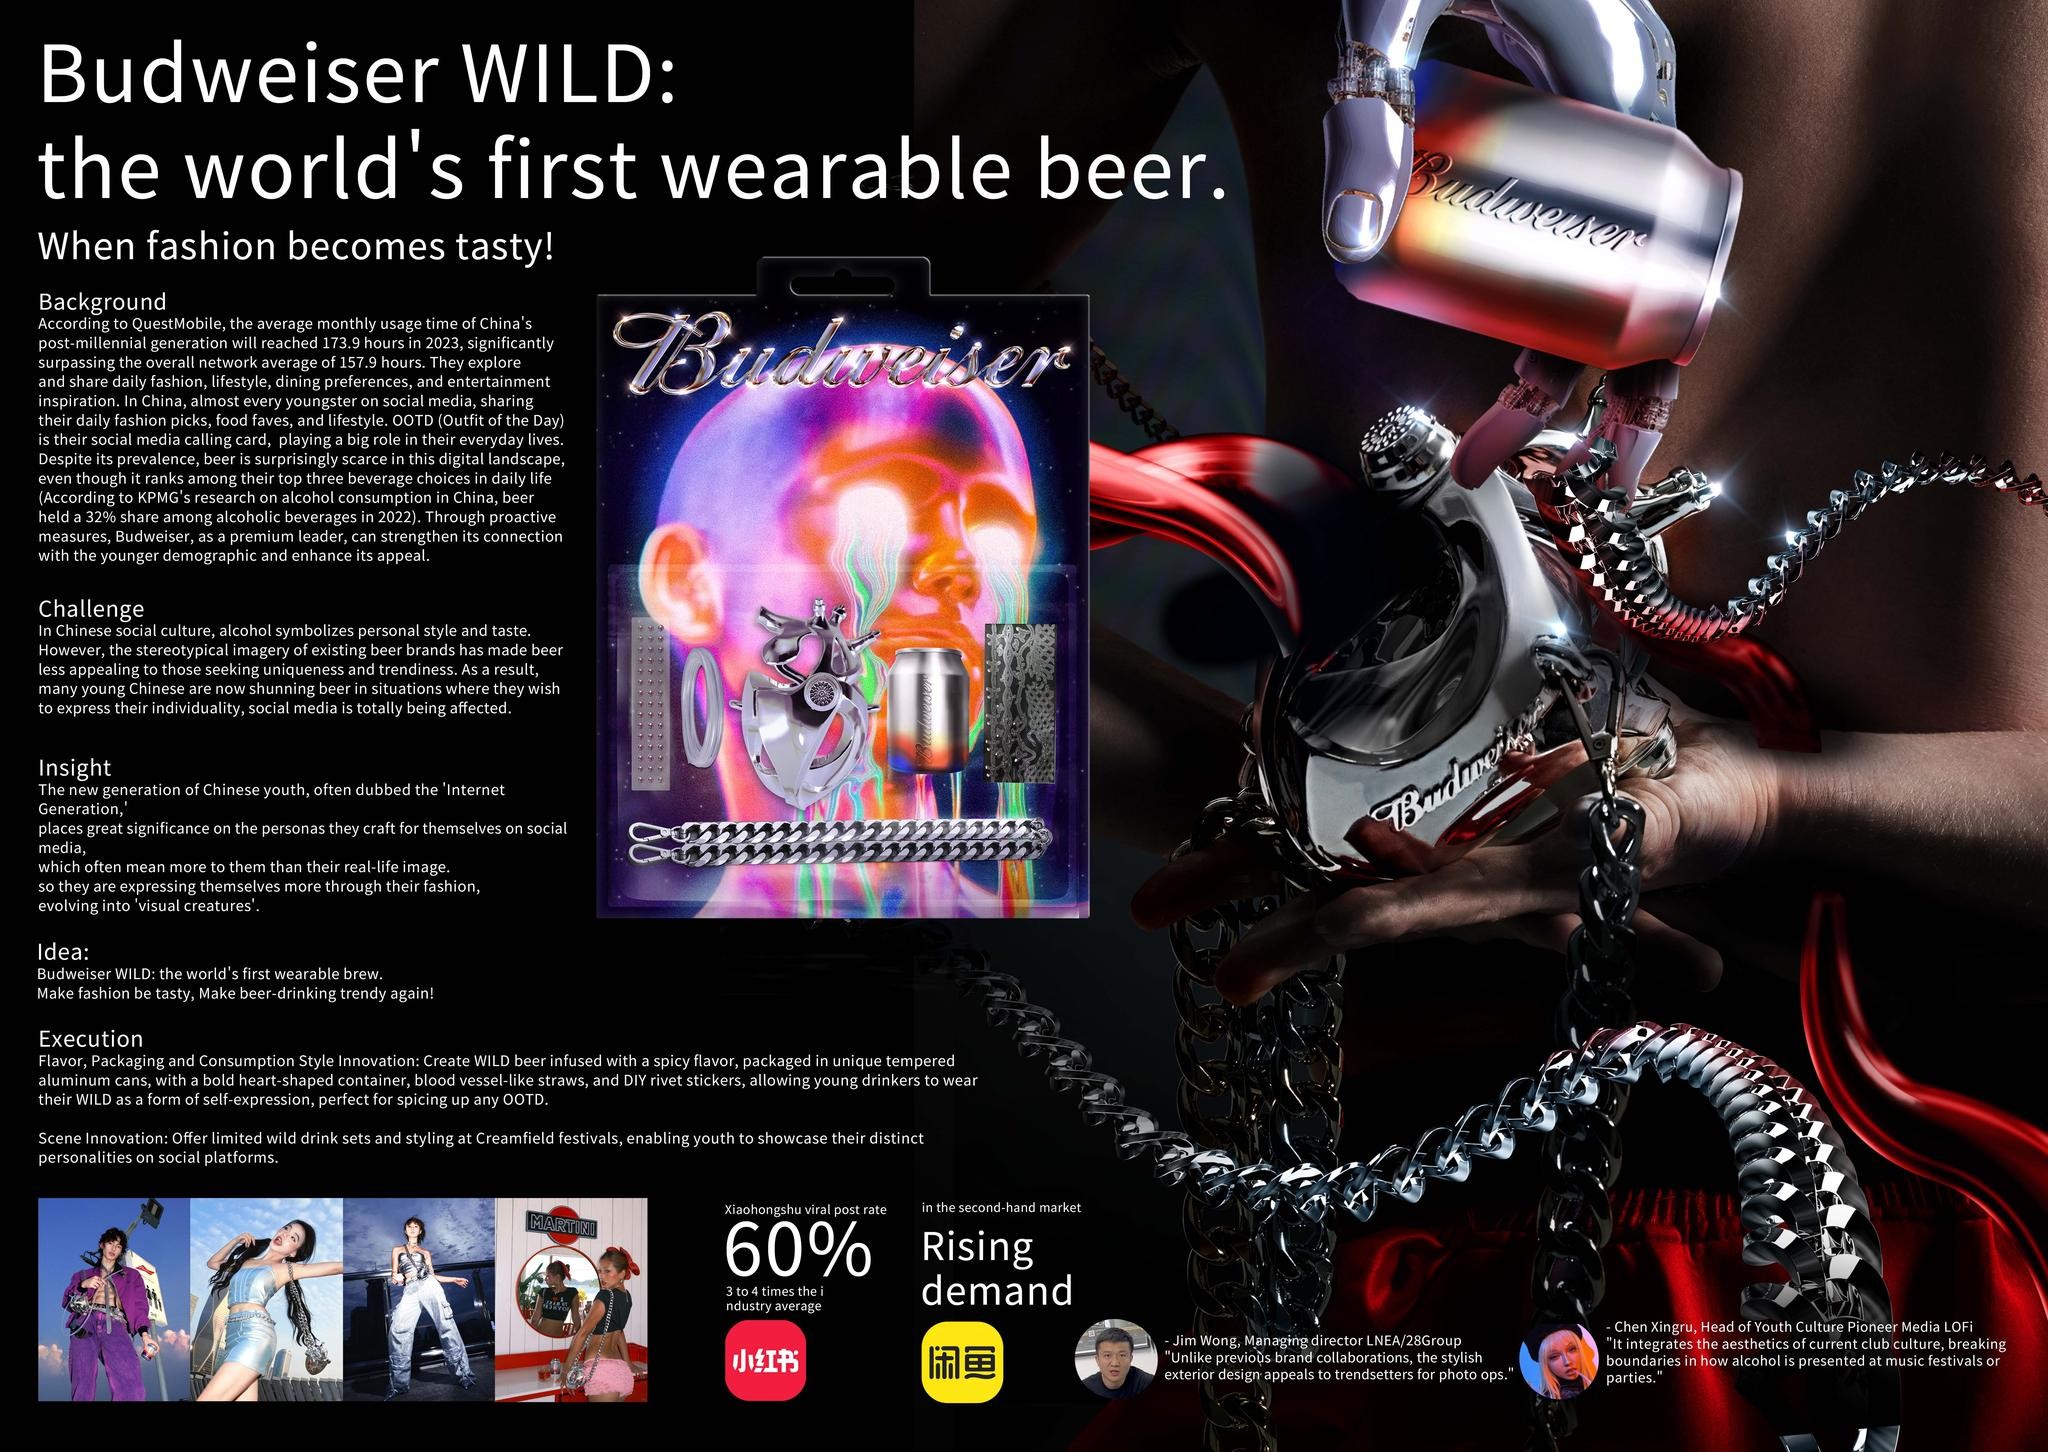 Budweiser WILD: the world's first wearable beer.